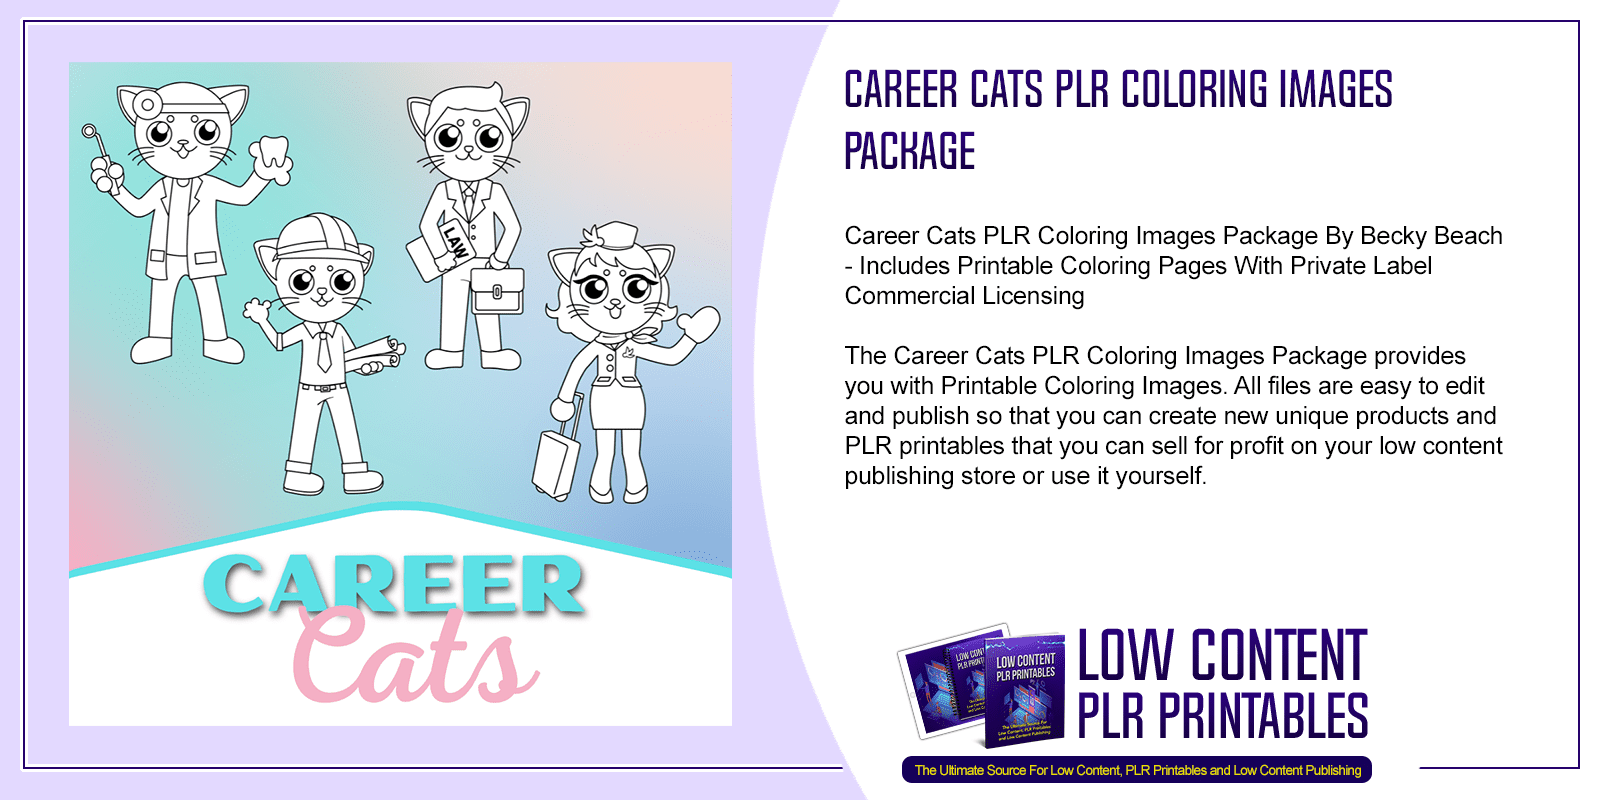 Career Cats PLR Coloring Images Package 2